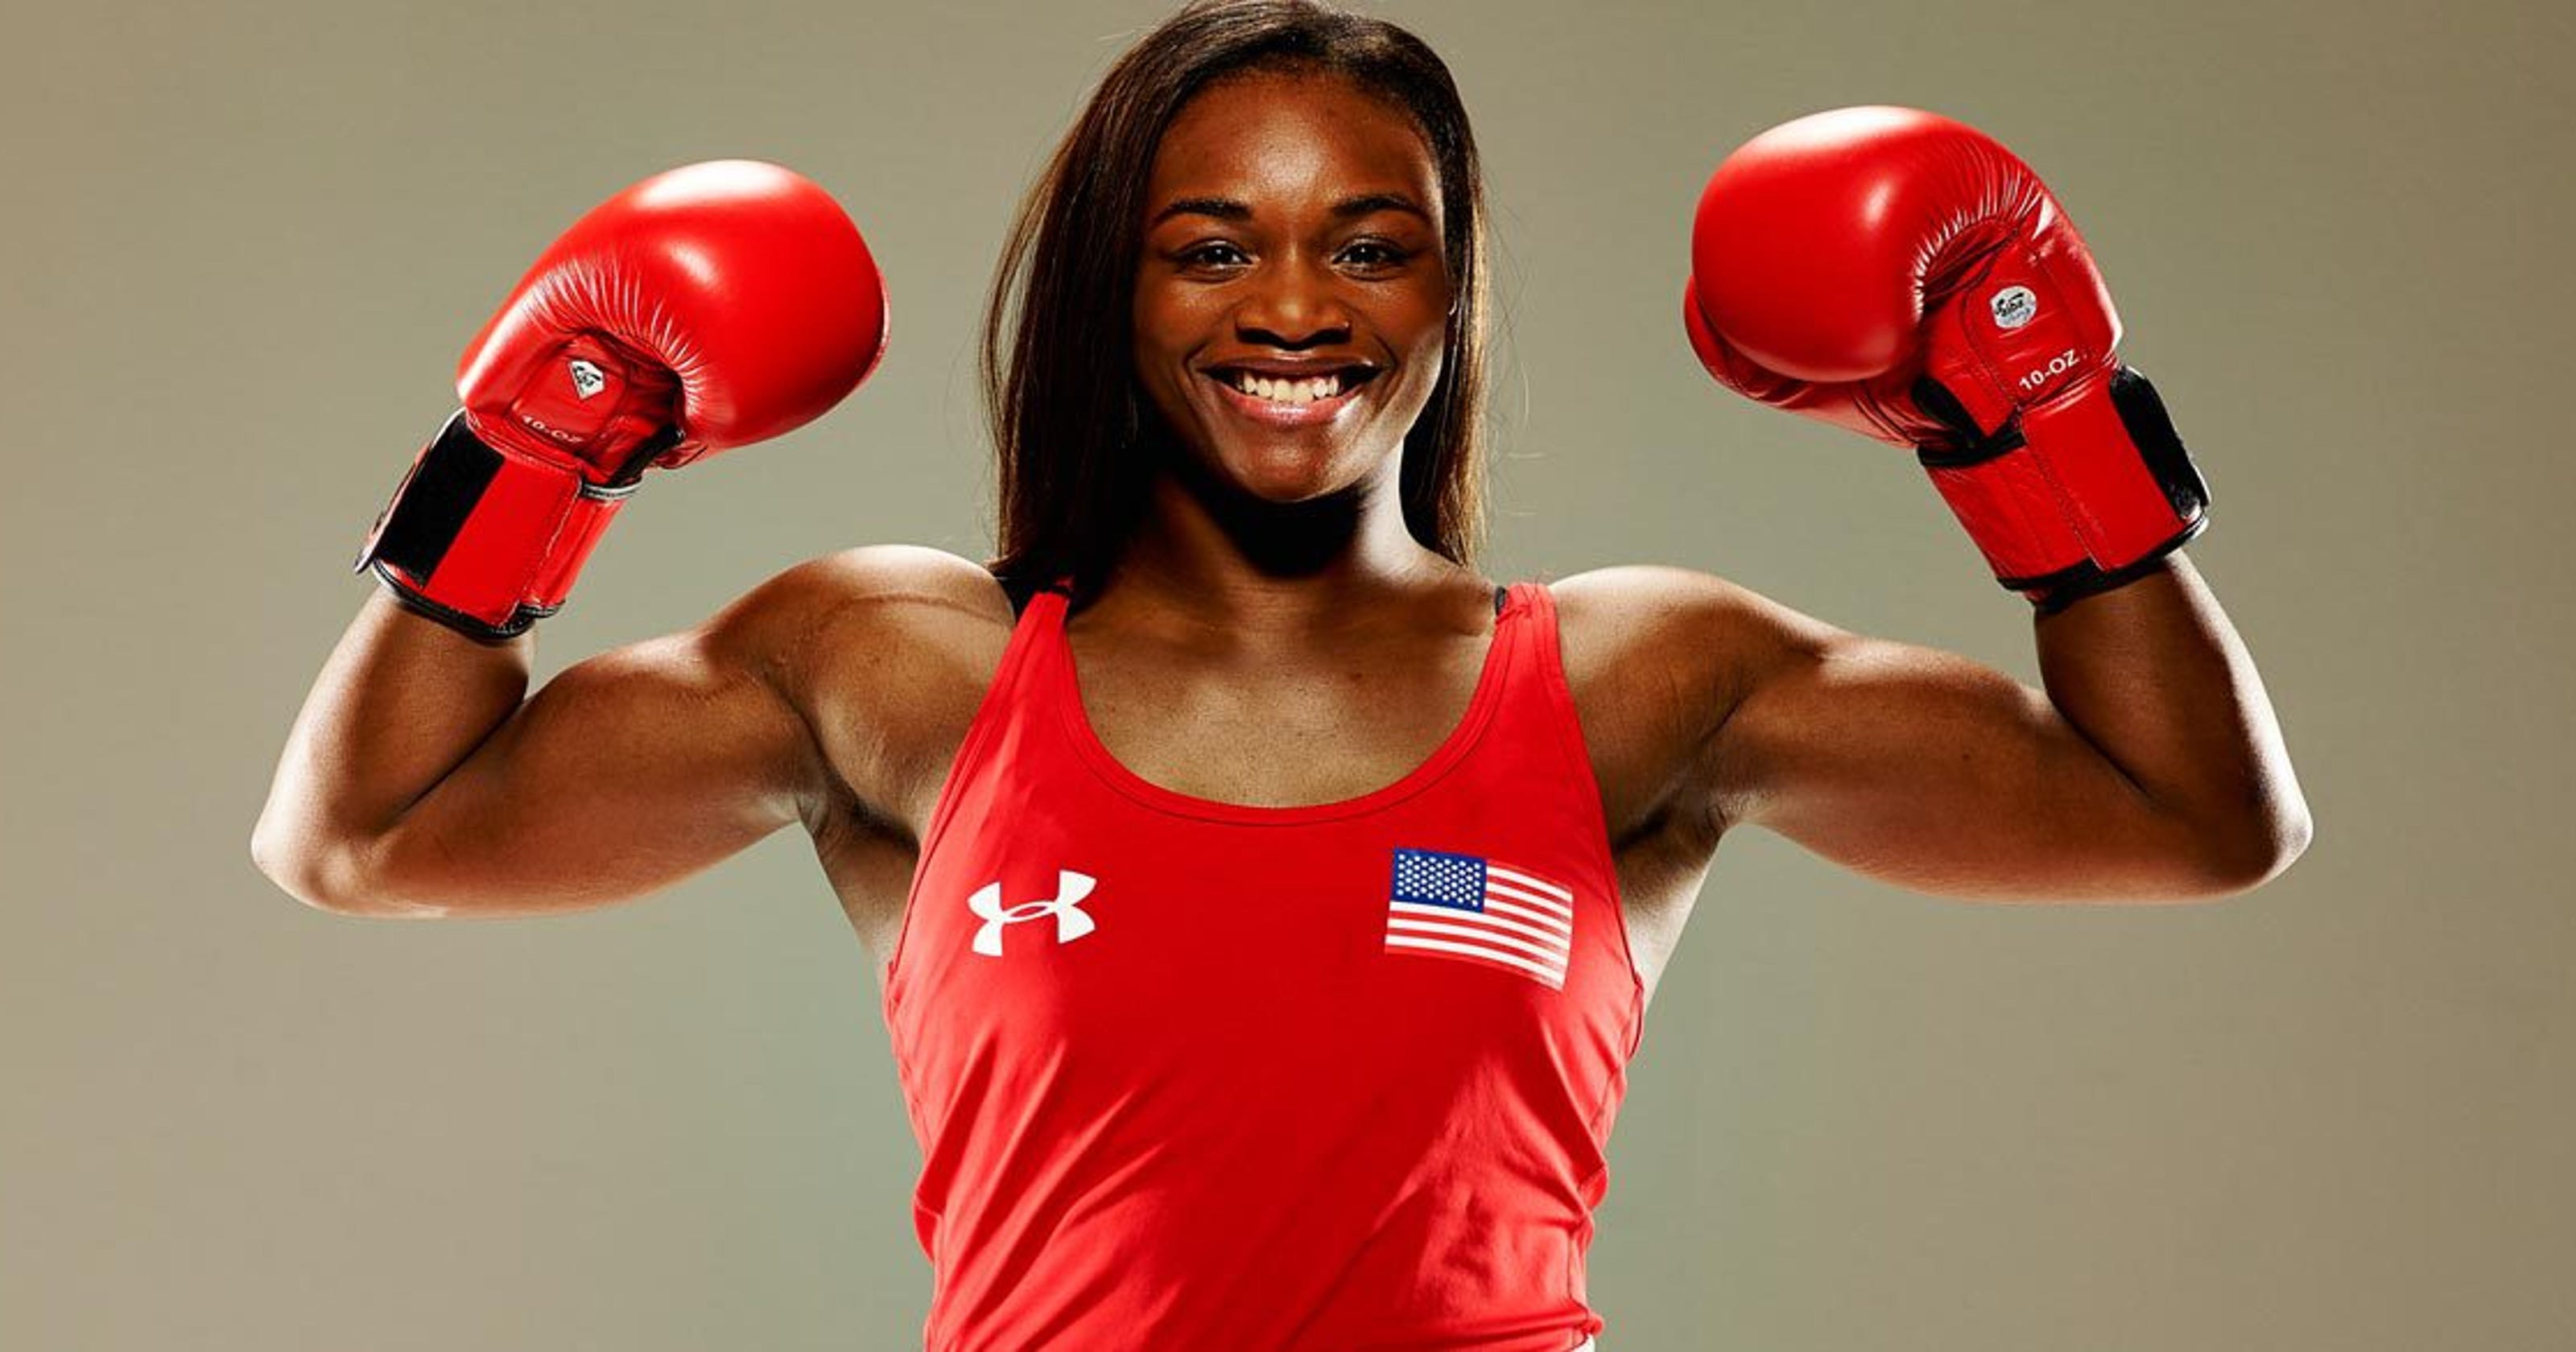 Claressa Shields wins second consecutive Women's World Championships gold medal